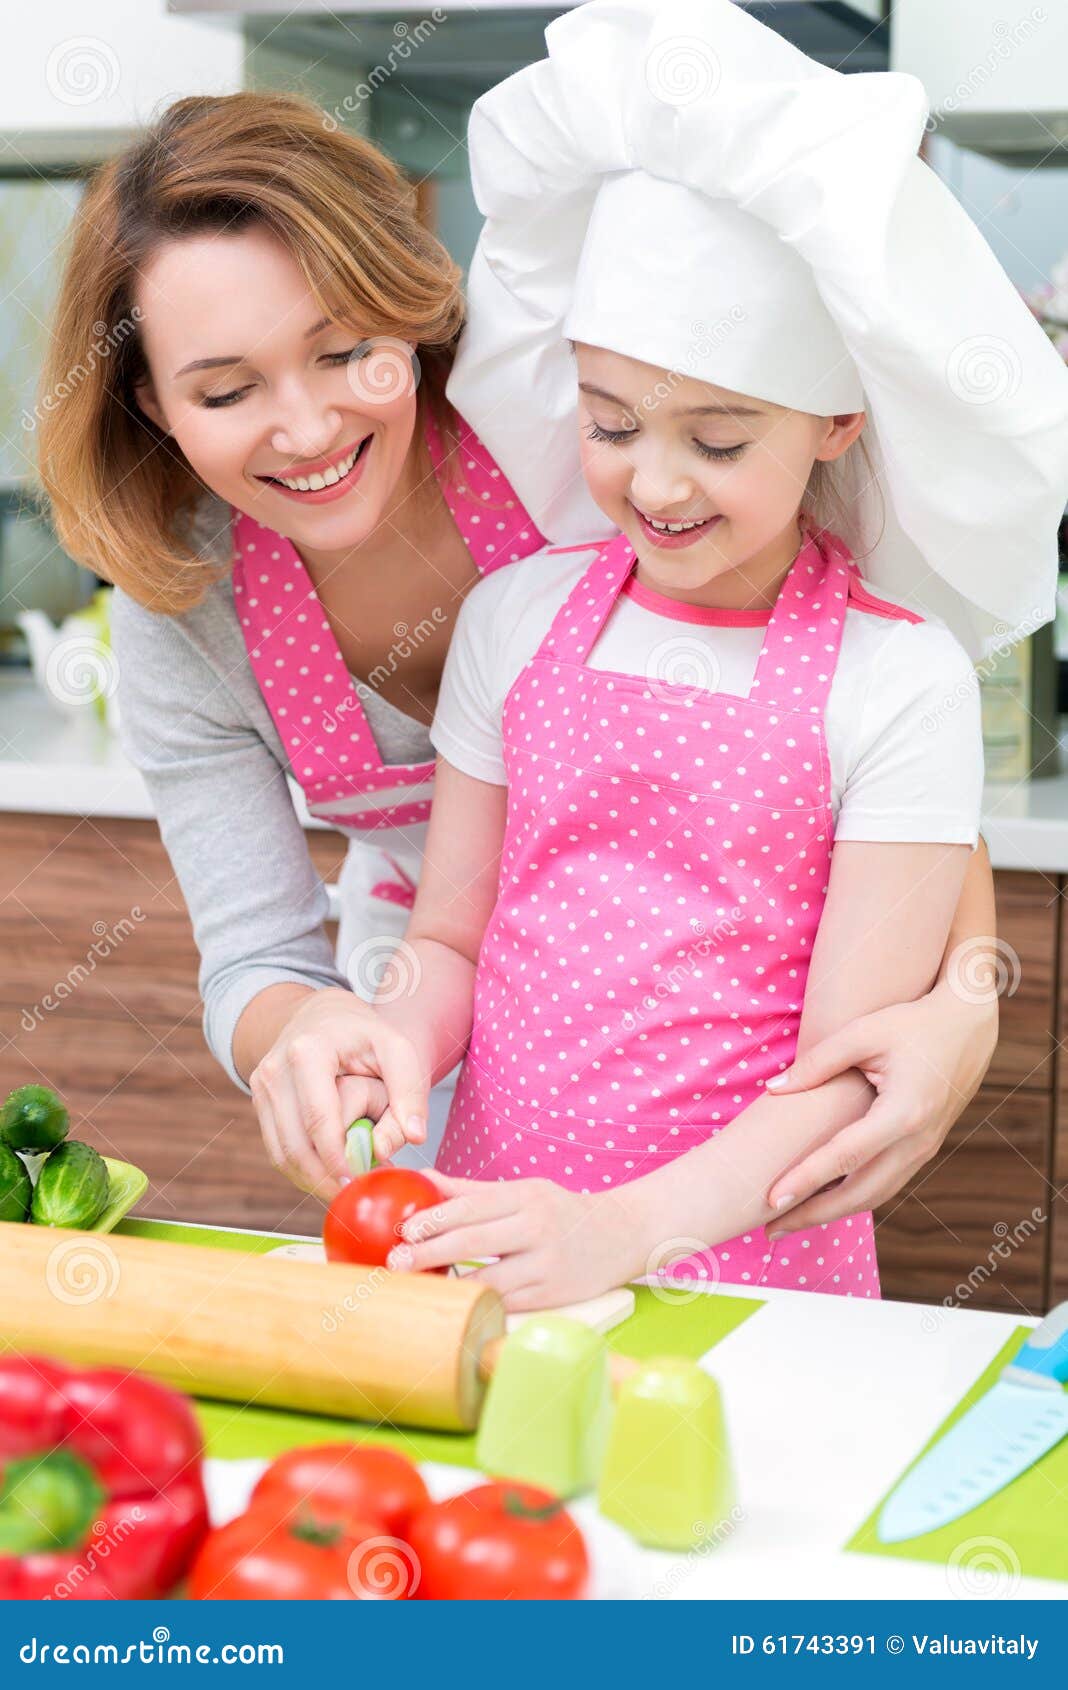 Smiling Young Mother With Daughter Cooking Stock Image Image Of Little Cheerful 61743391 